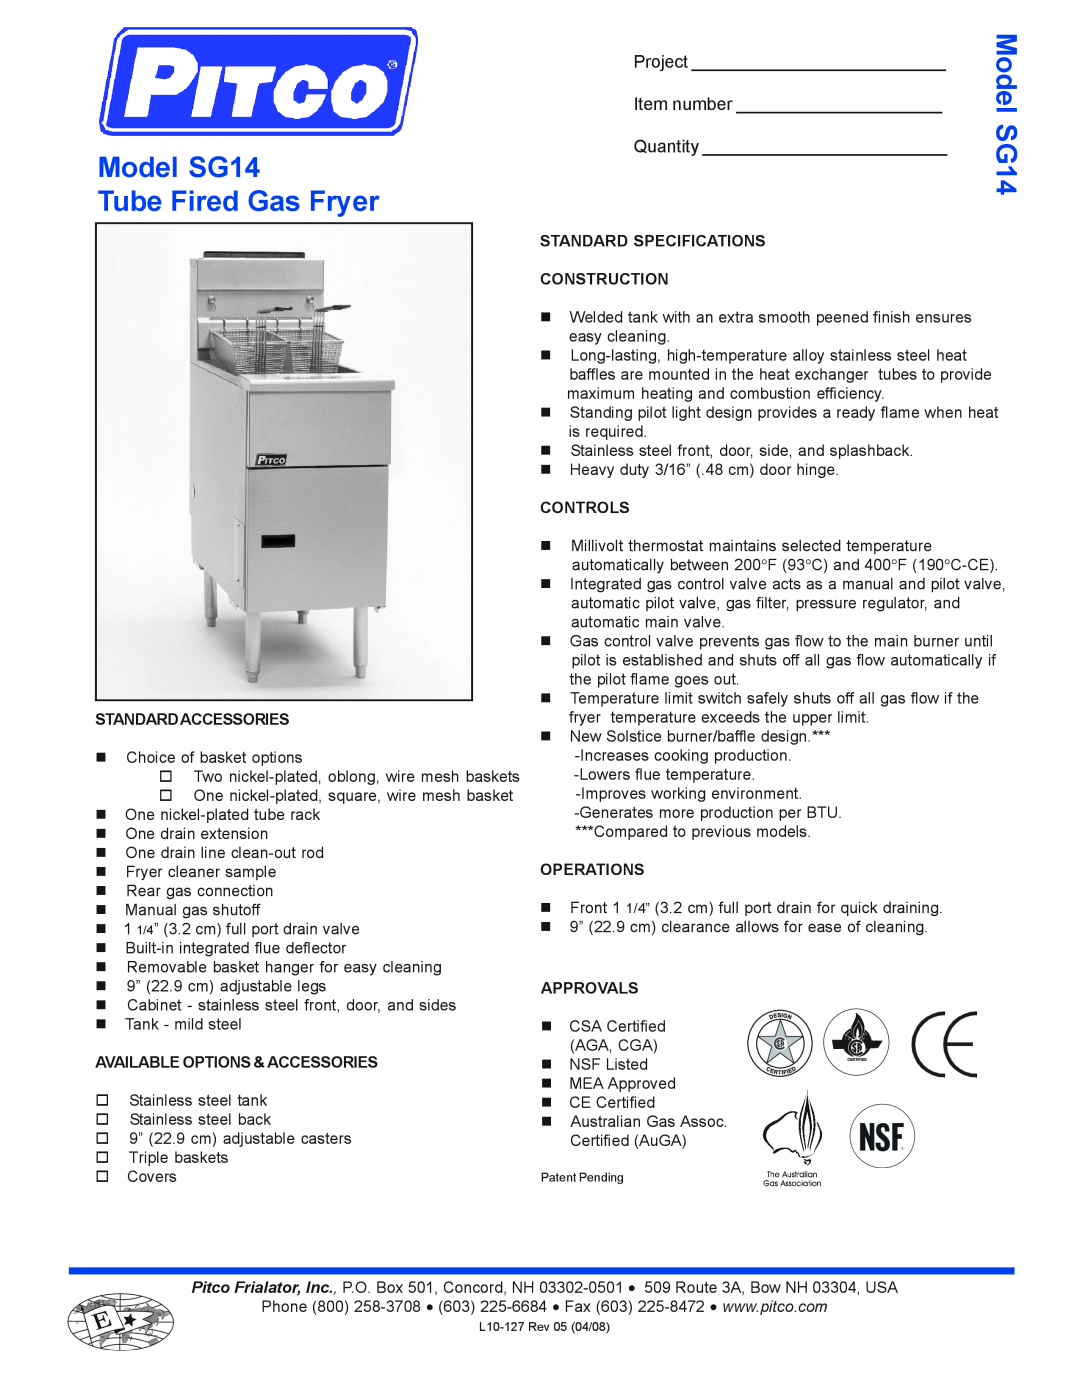 Pitco Frialator specifications Model SG14 Tube Fired Gas Fryer, Project, Item number, Quantity, Standardaccessories 